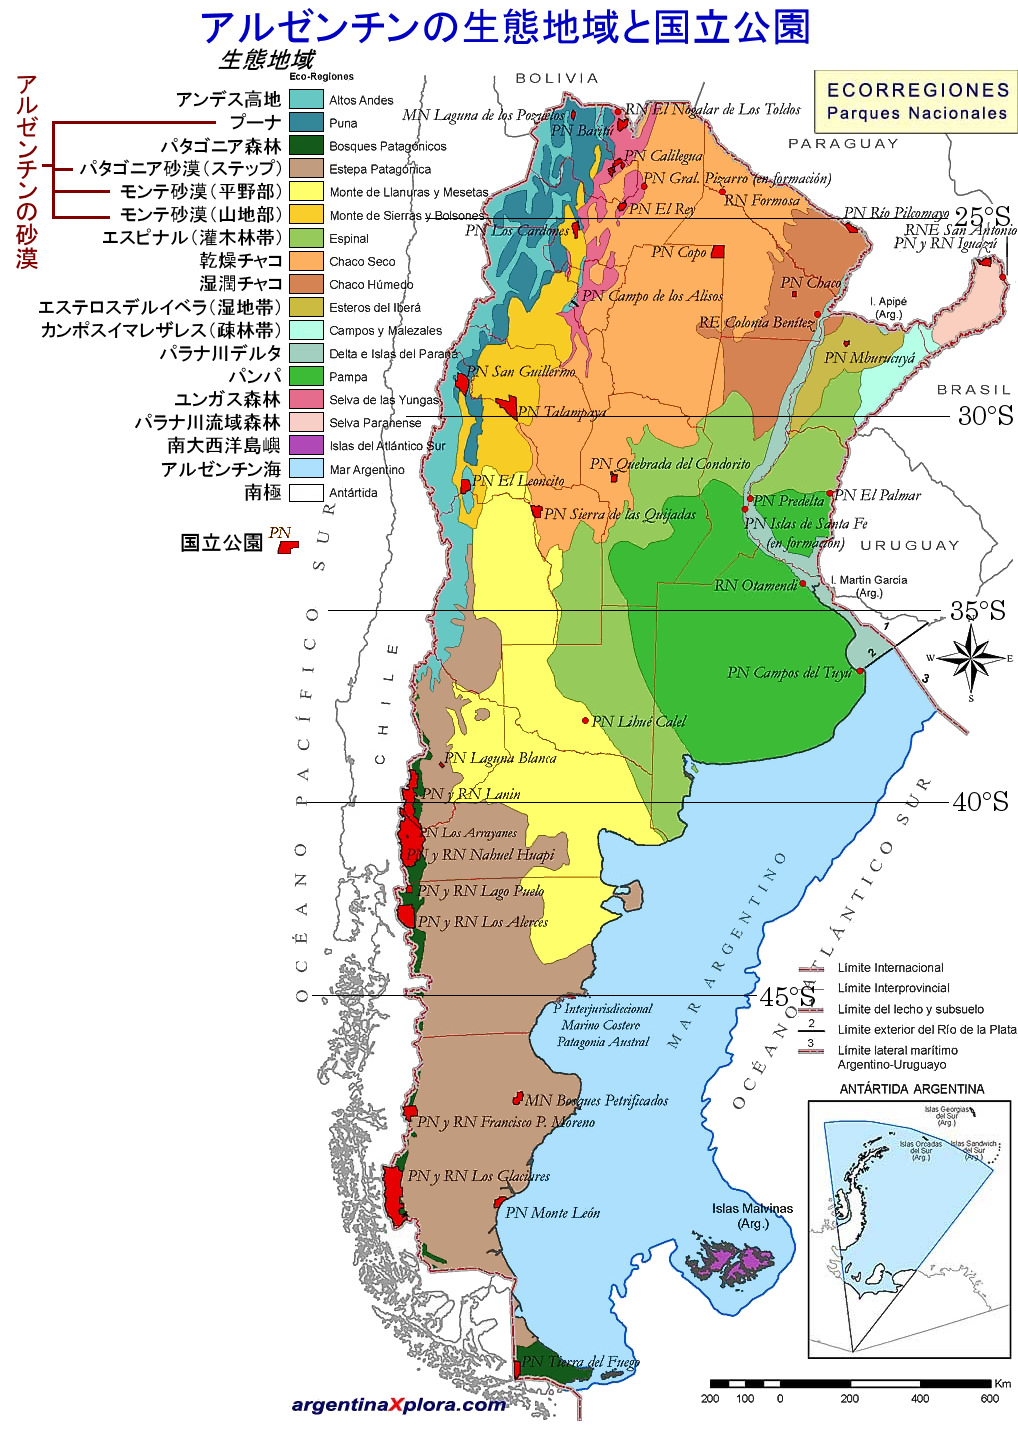 Ecological regions and national parks in Argentina